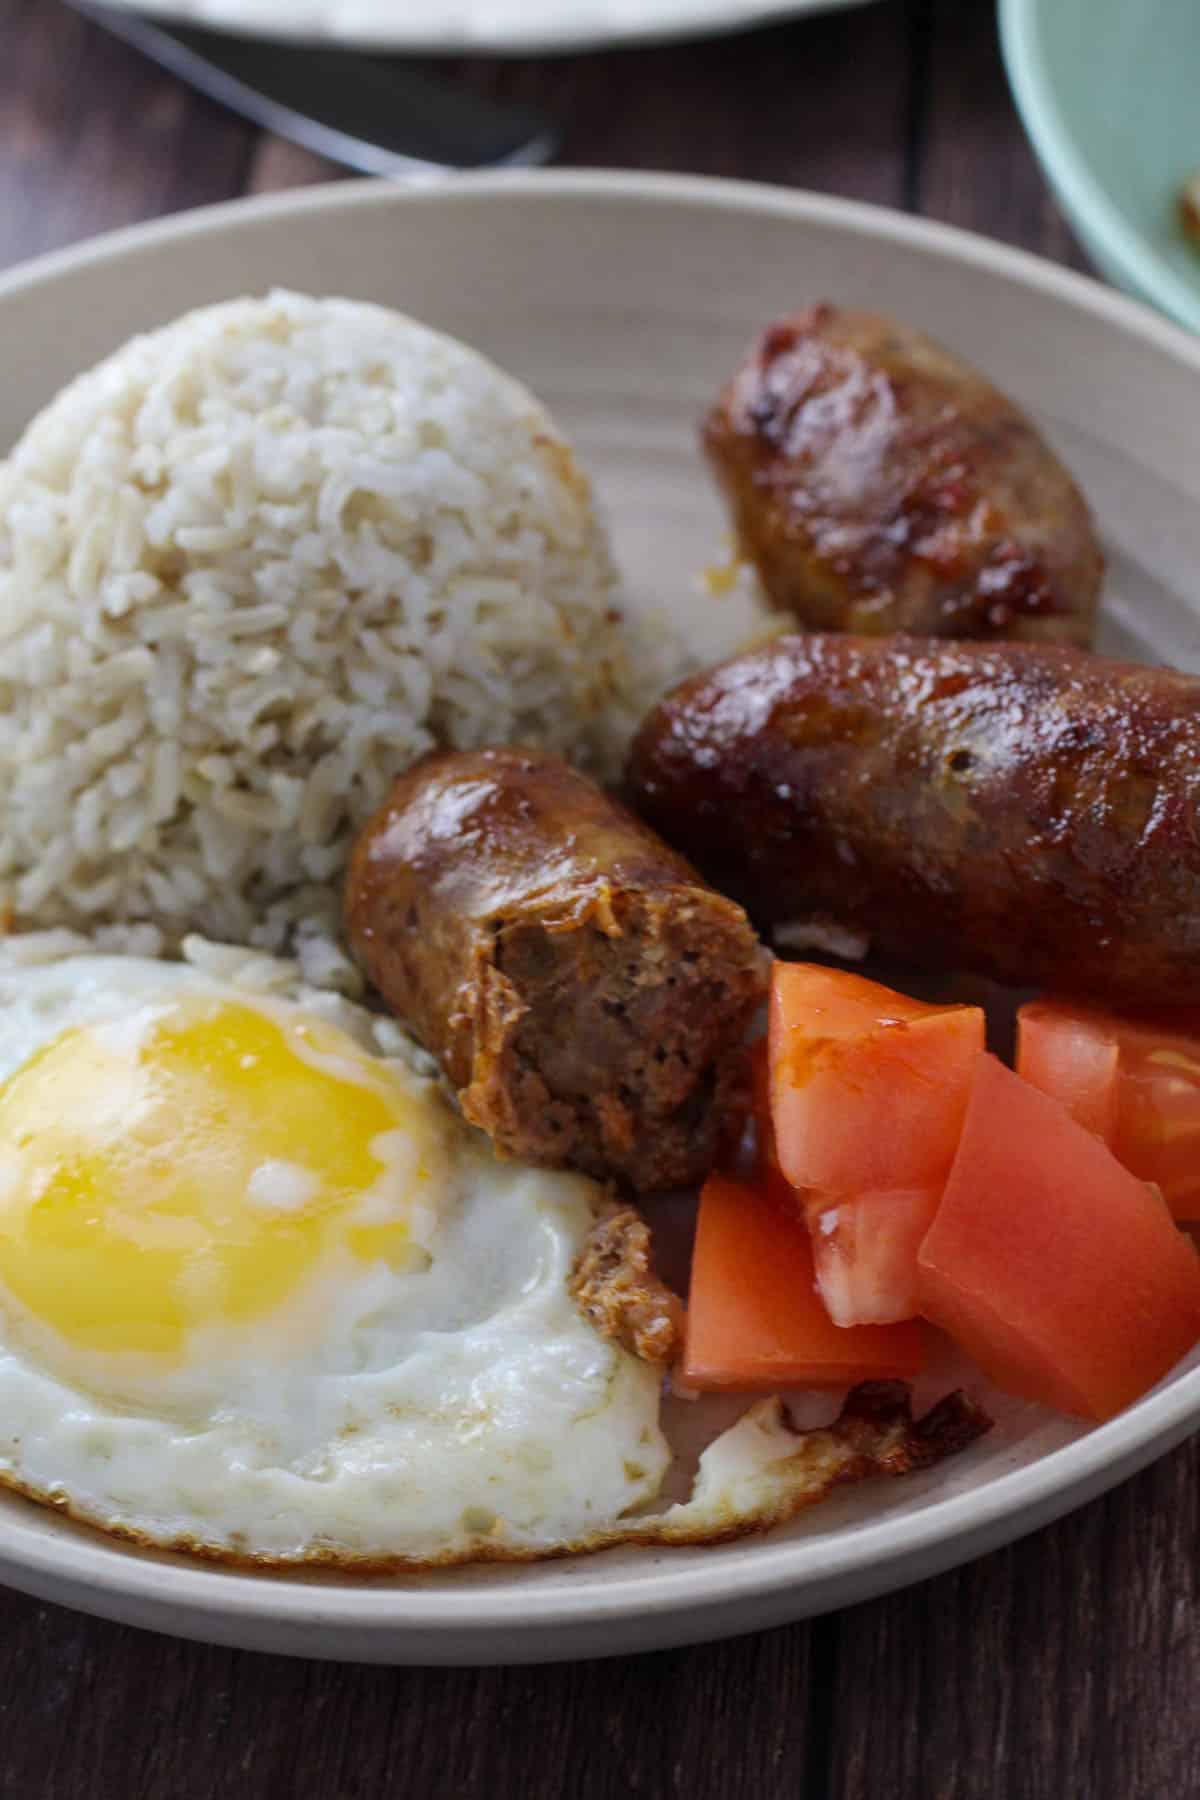 fried rice, fried egg, sliced tomatoes, and longganisa on a plate